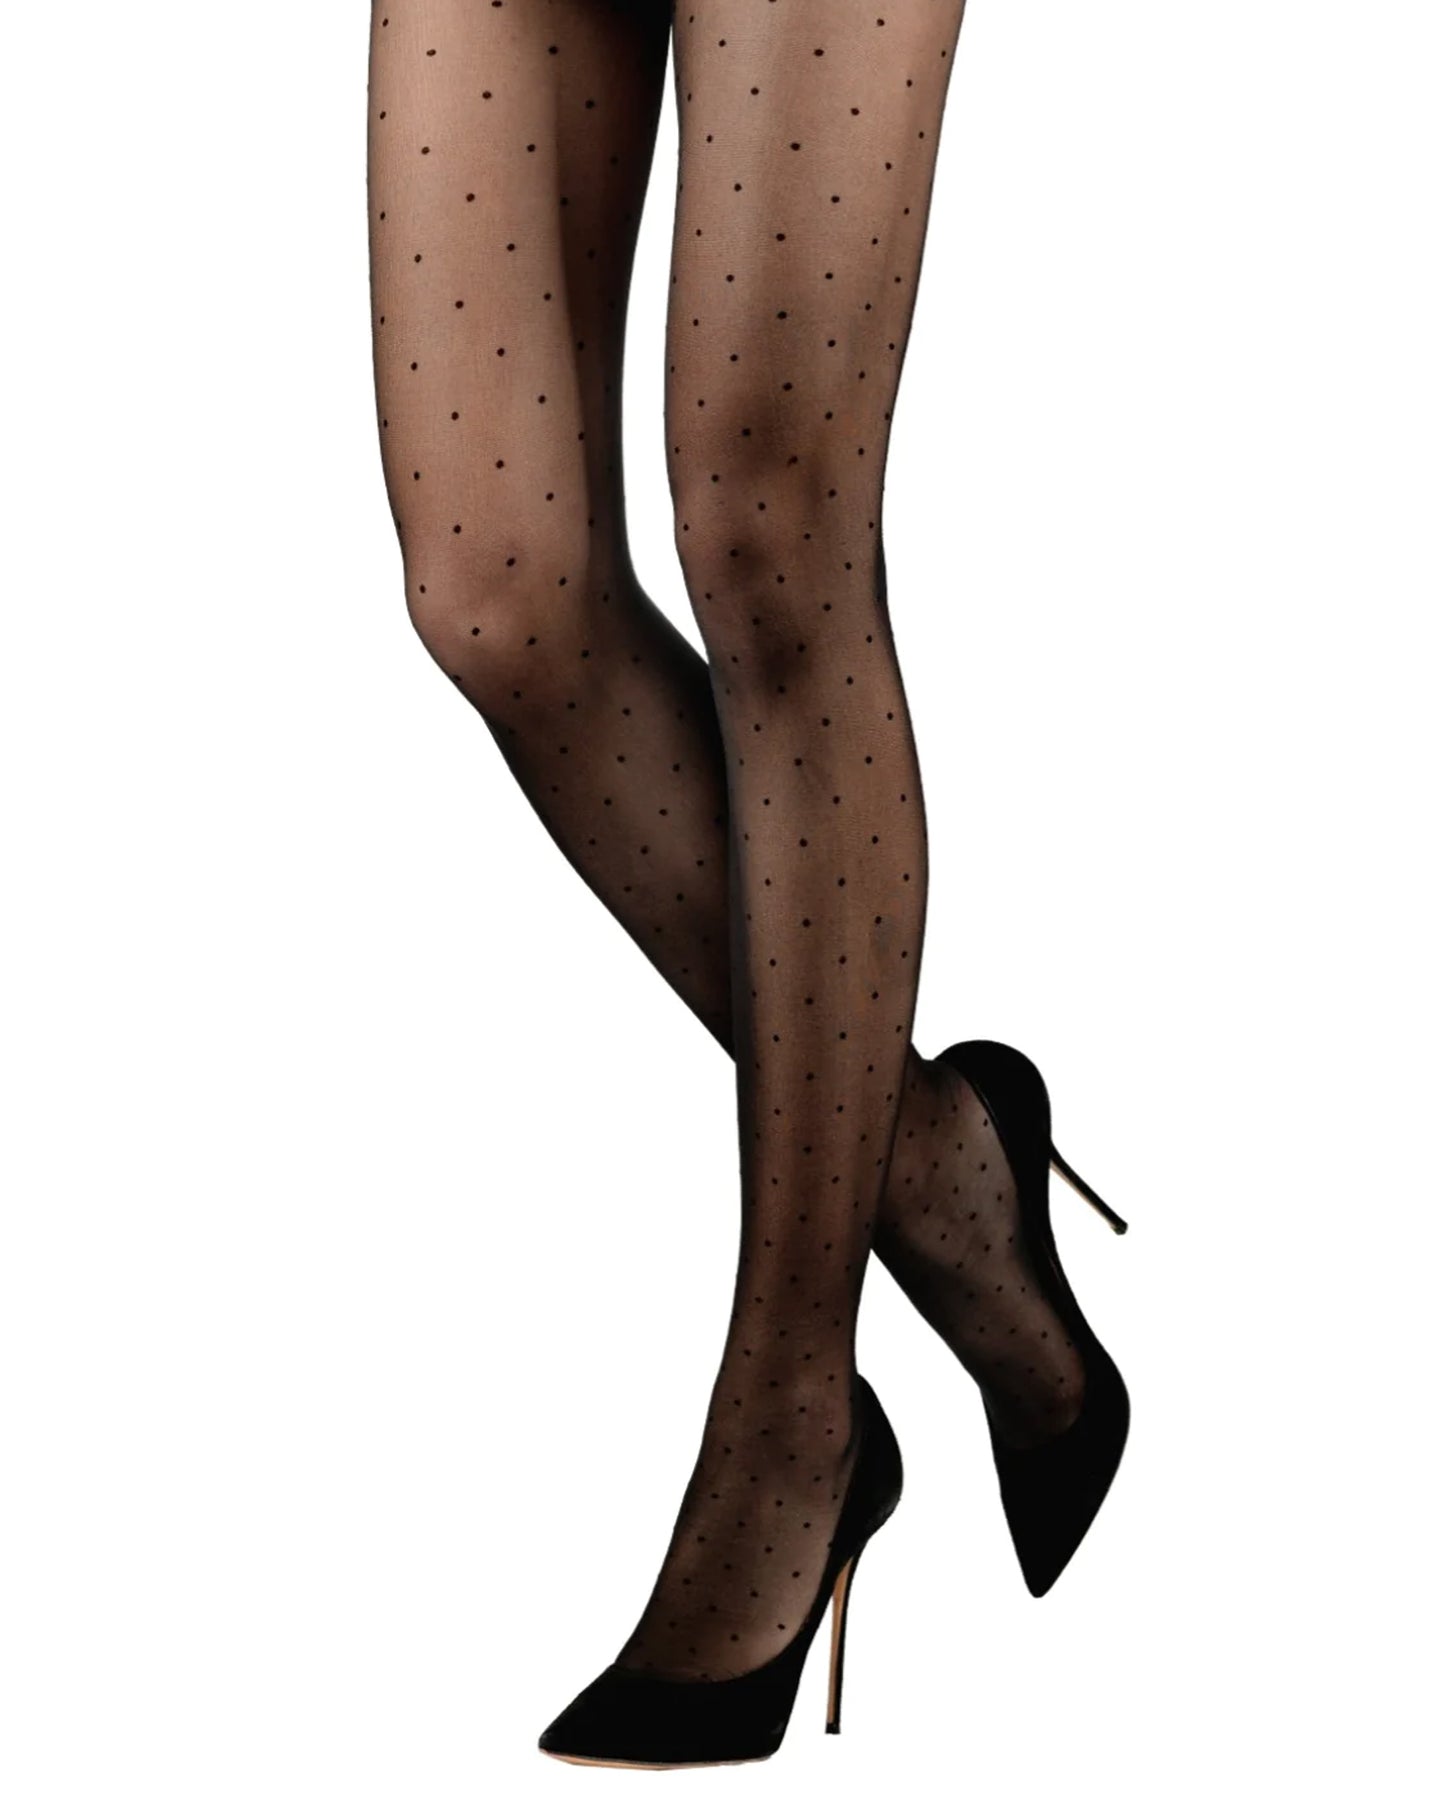 Emilio Cavallini Plumetis Tights - Sheer black fashion tights with a woven all over spot pattern.